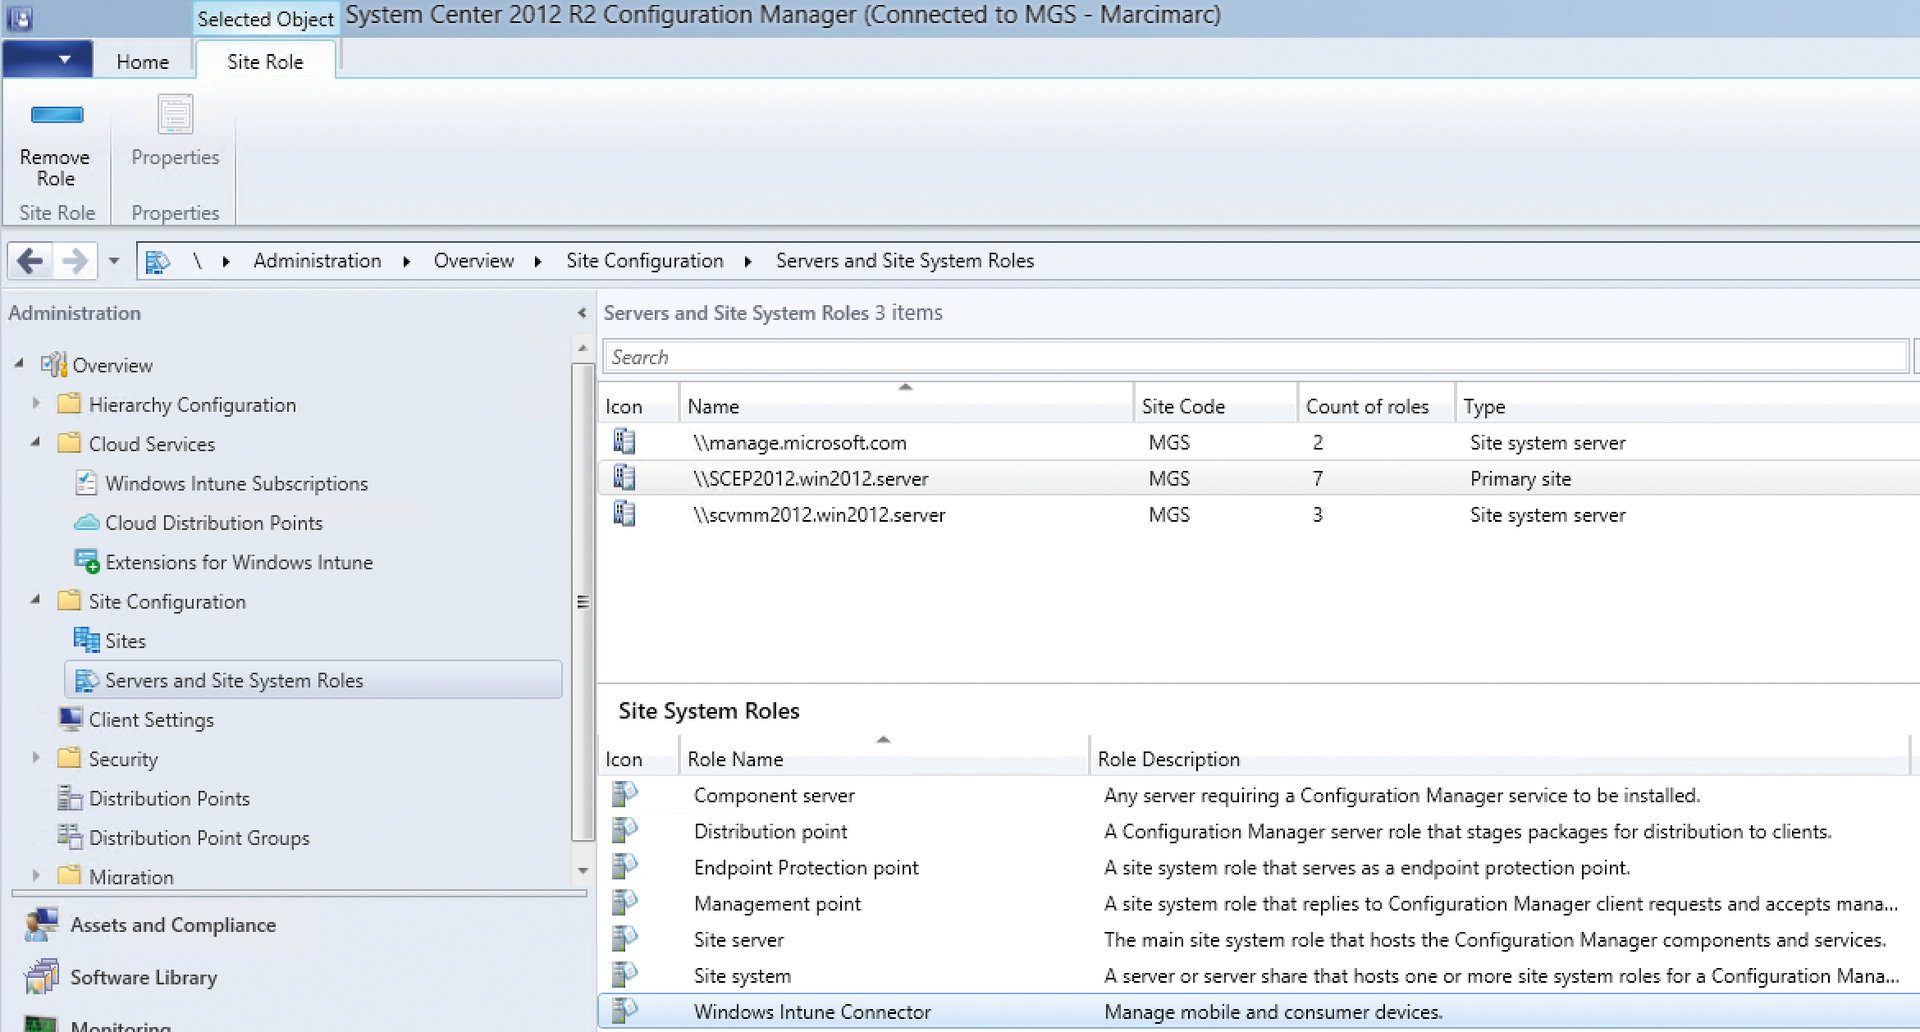 After completing the install, the Windows Intune Connector is available in the SCCM management console. 